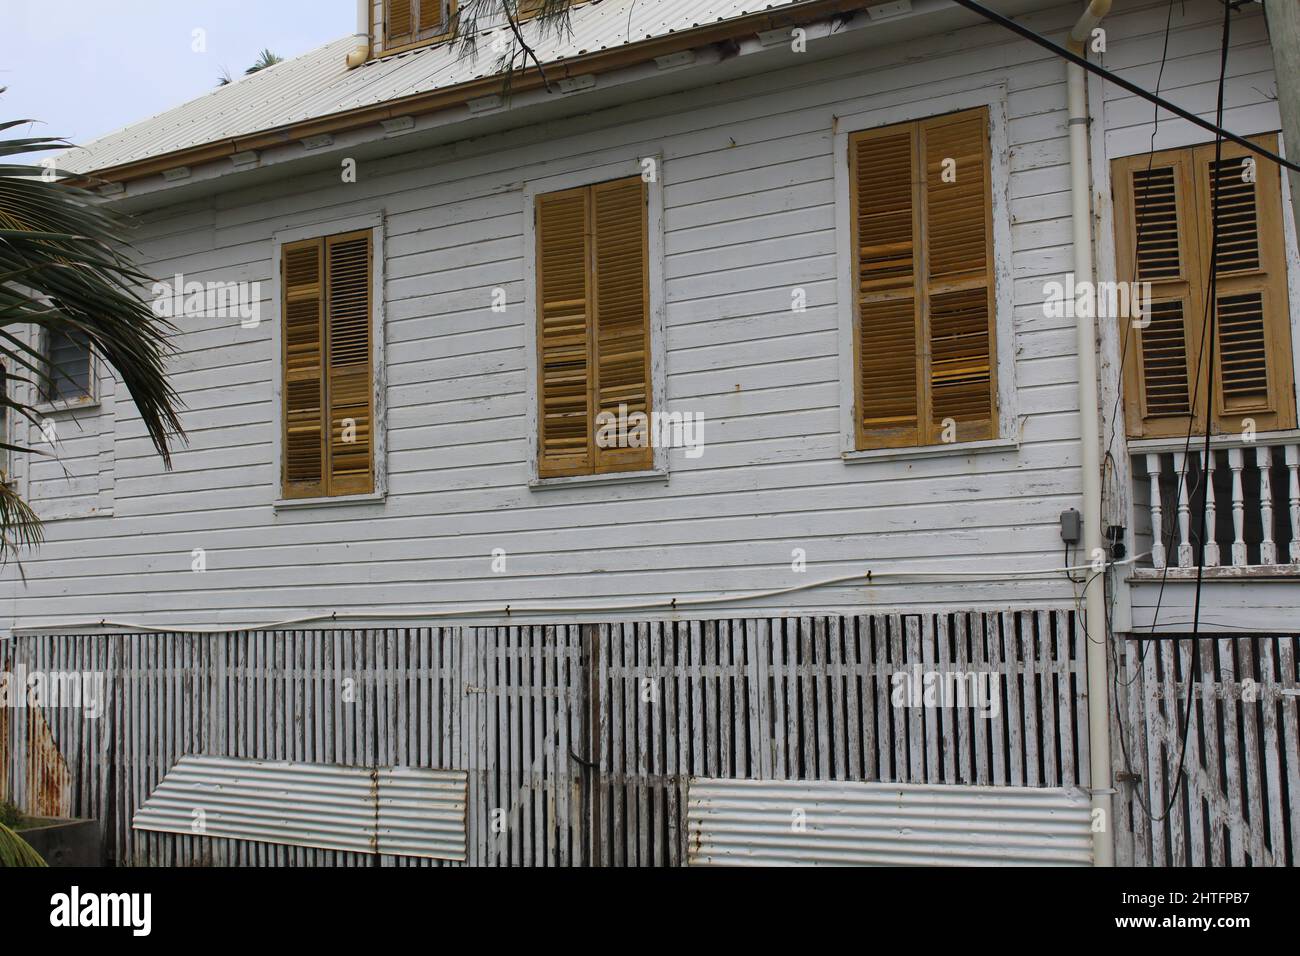 BELIZE CITY, BELIZE - SEPTEMBER 24, 2016 traditional wooden houses with yellow louvered windows in downtown Belize City Stock Photo